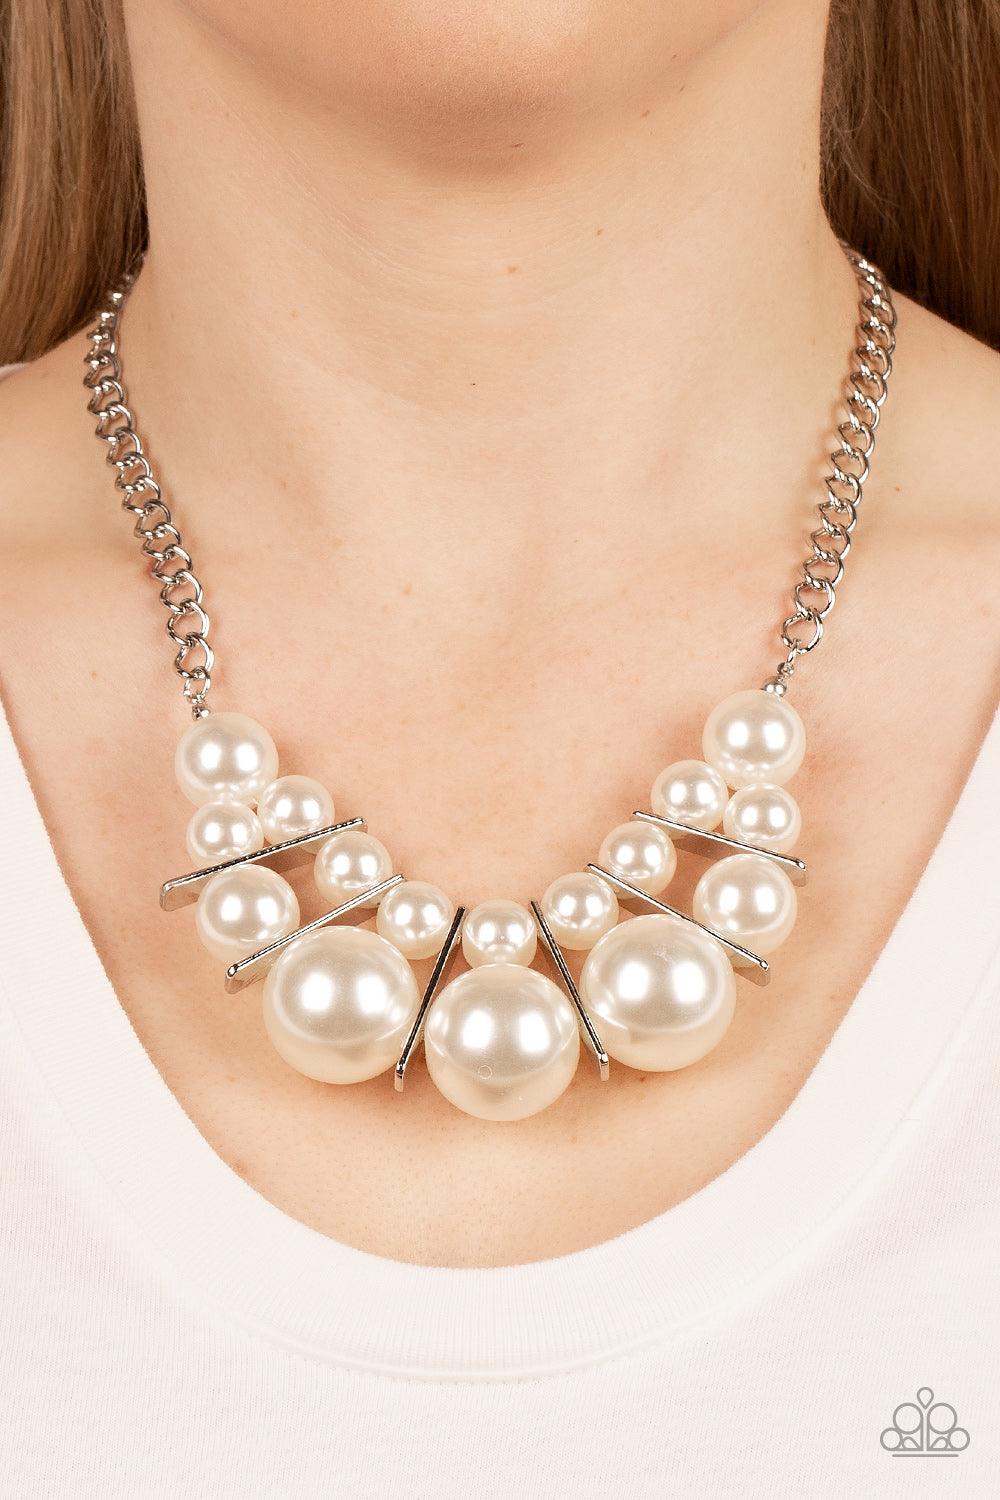 Paparazzi Accessories Challenge Accepted - White Separated by rectangular silver frames, bubbly rows of classic and oversized white pearls are threaded along invisible wires at the bottom of a chunky silver chain for an effervescent explosion below the co